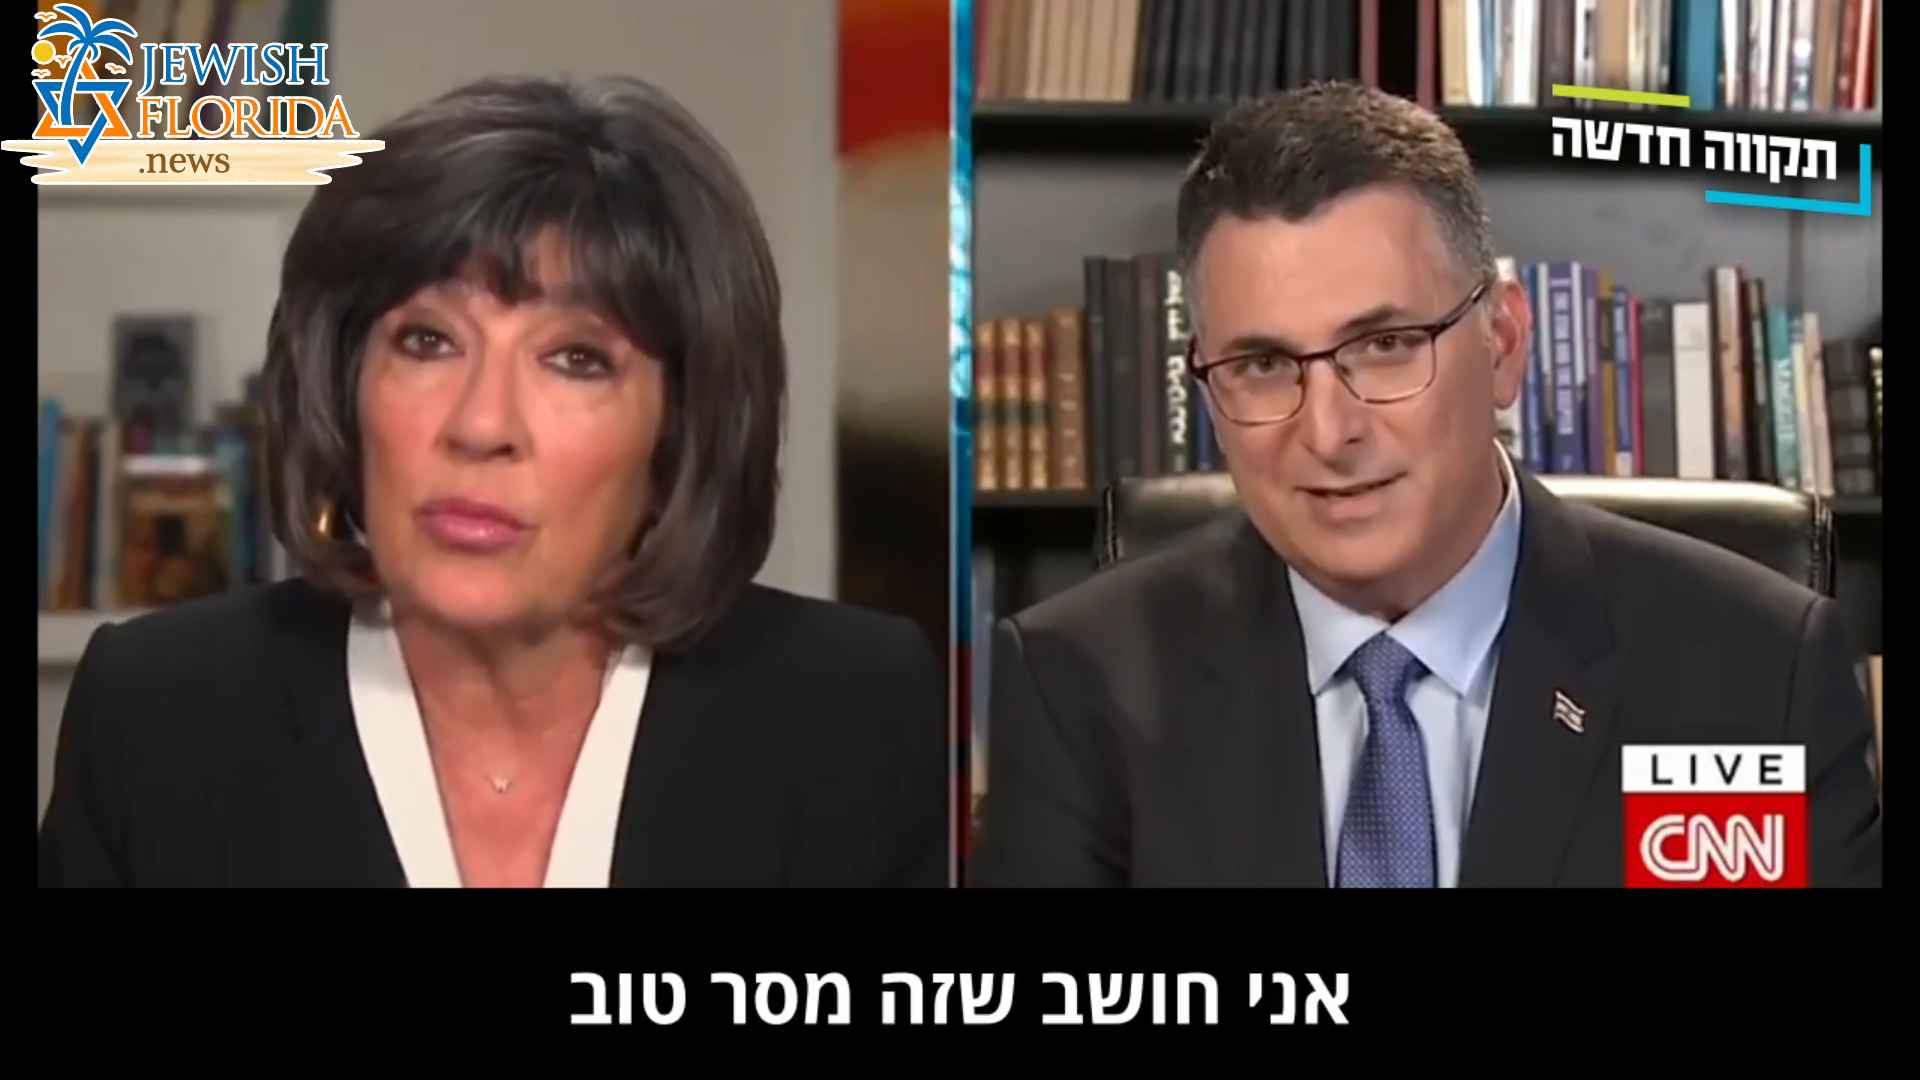 Israeli Politician put CNN Anchor in her Place After her Antisemitic Slur